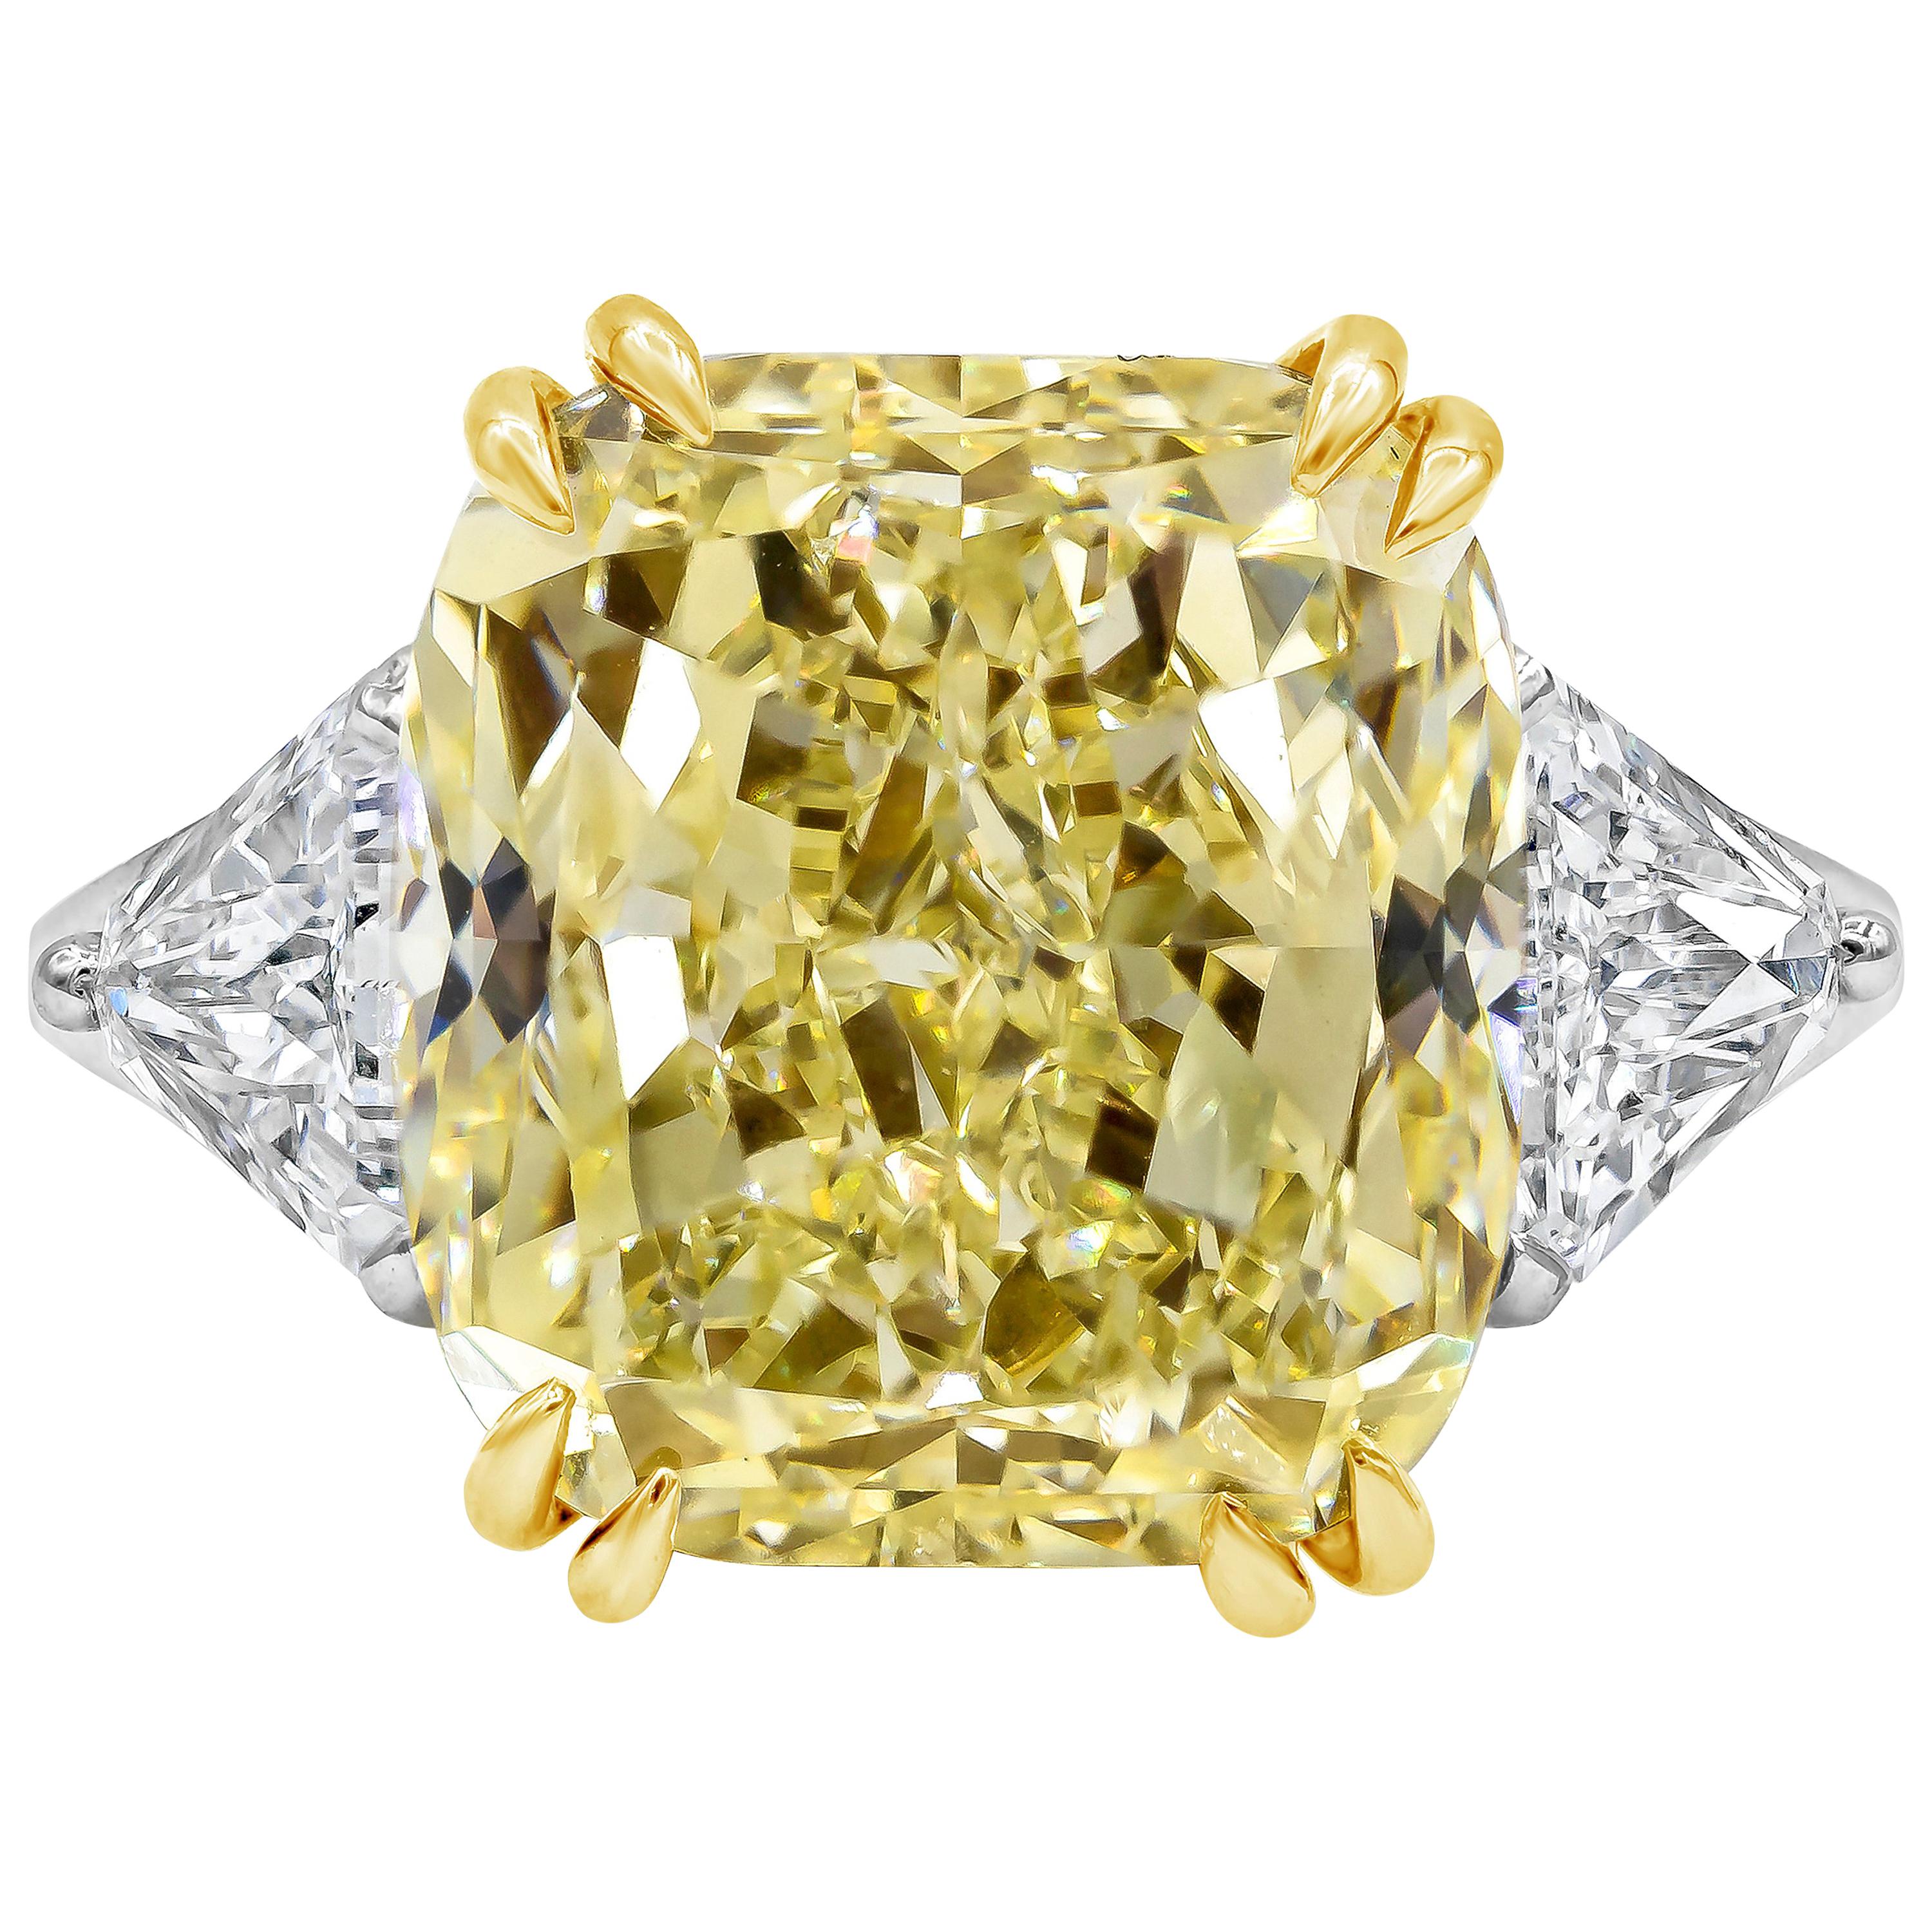 GIA Certified 12.15 Carat Cushion Cut Fancy Light Yellow Diamond Engagement Ring For Sale